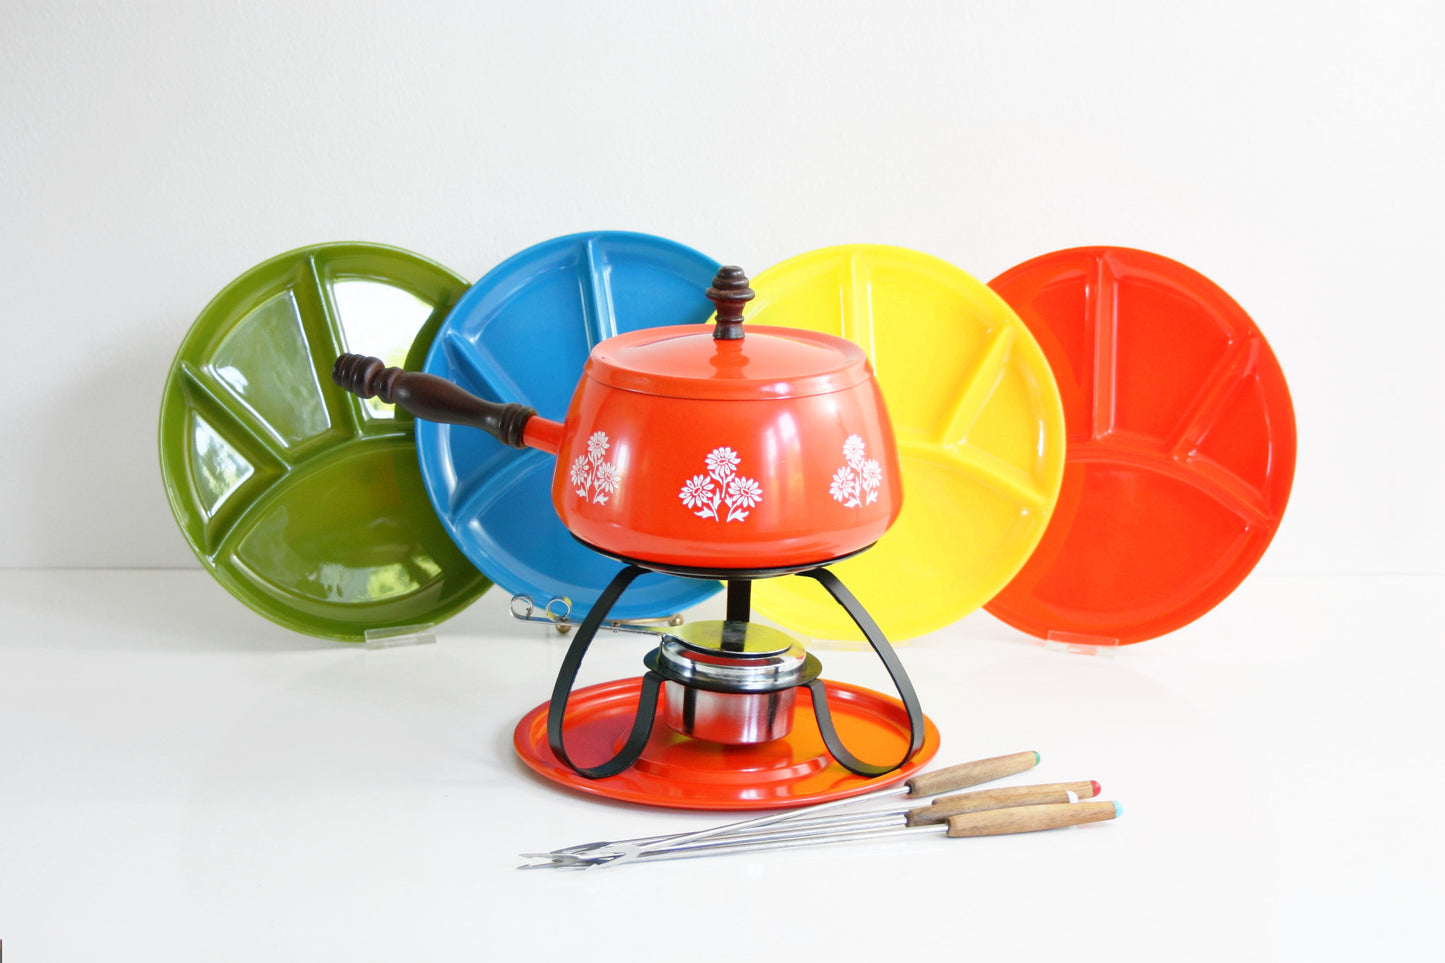 SOLD - Colorful Vintage Fondue Set / Mid Century Fondue Pot With Colorful Plates and Forks